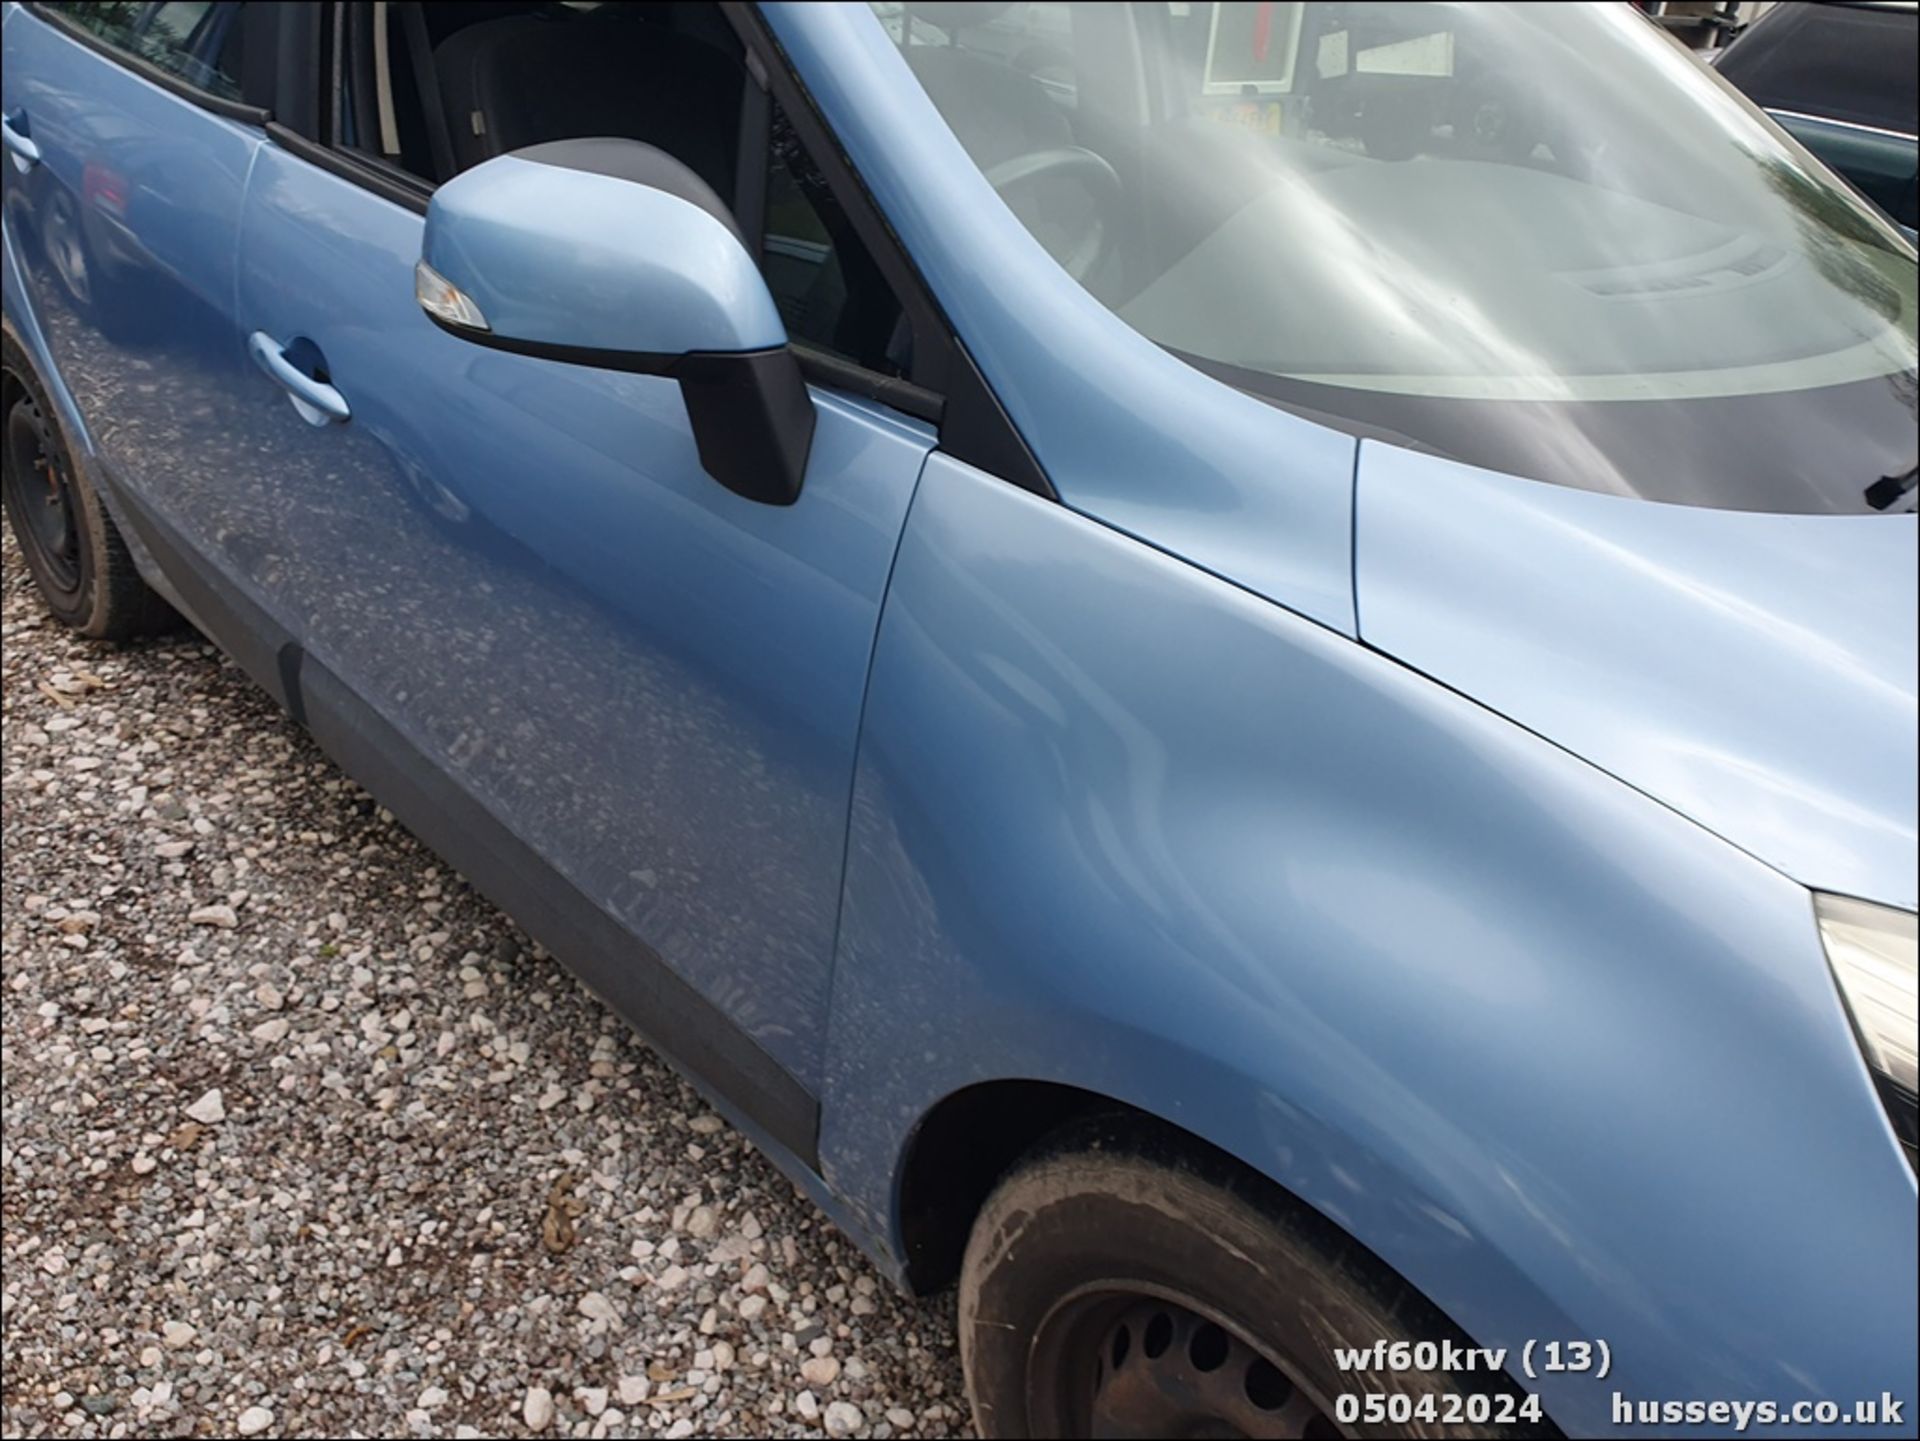 10/60 RENAULT SCENIC EXPRESSION DCI 105 - 1461cc 5dr MPV (Blue) - Image 14 of 50